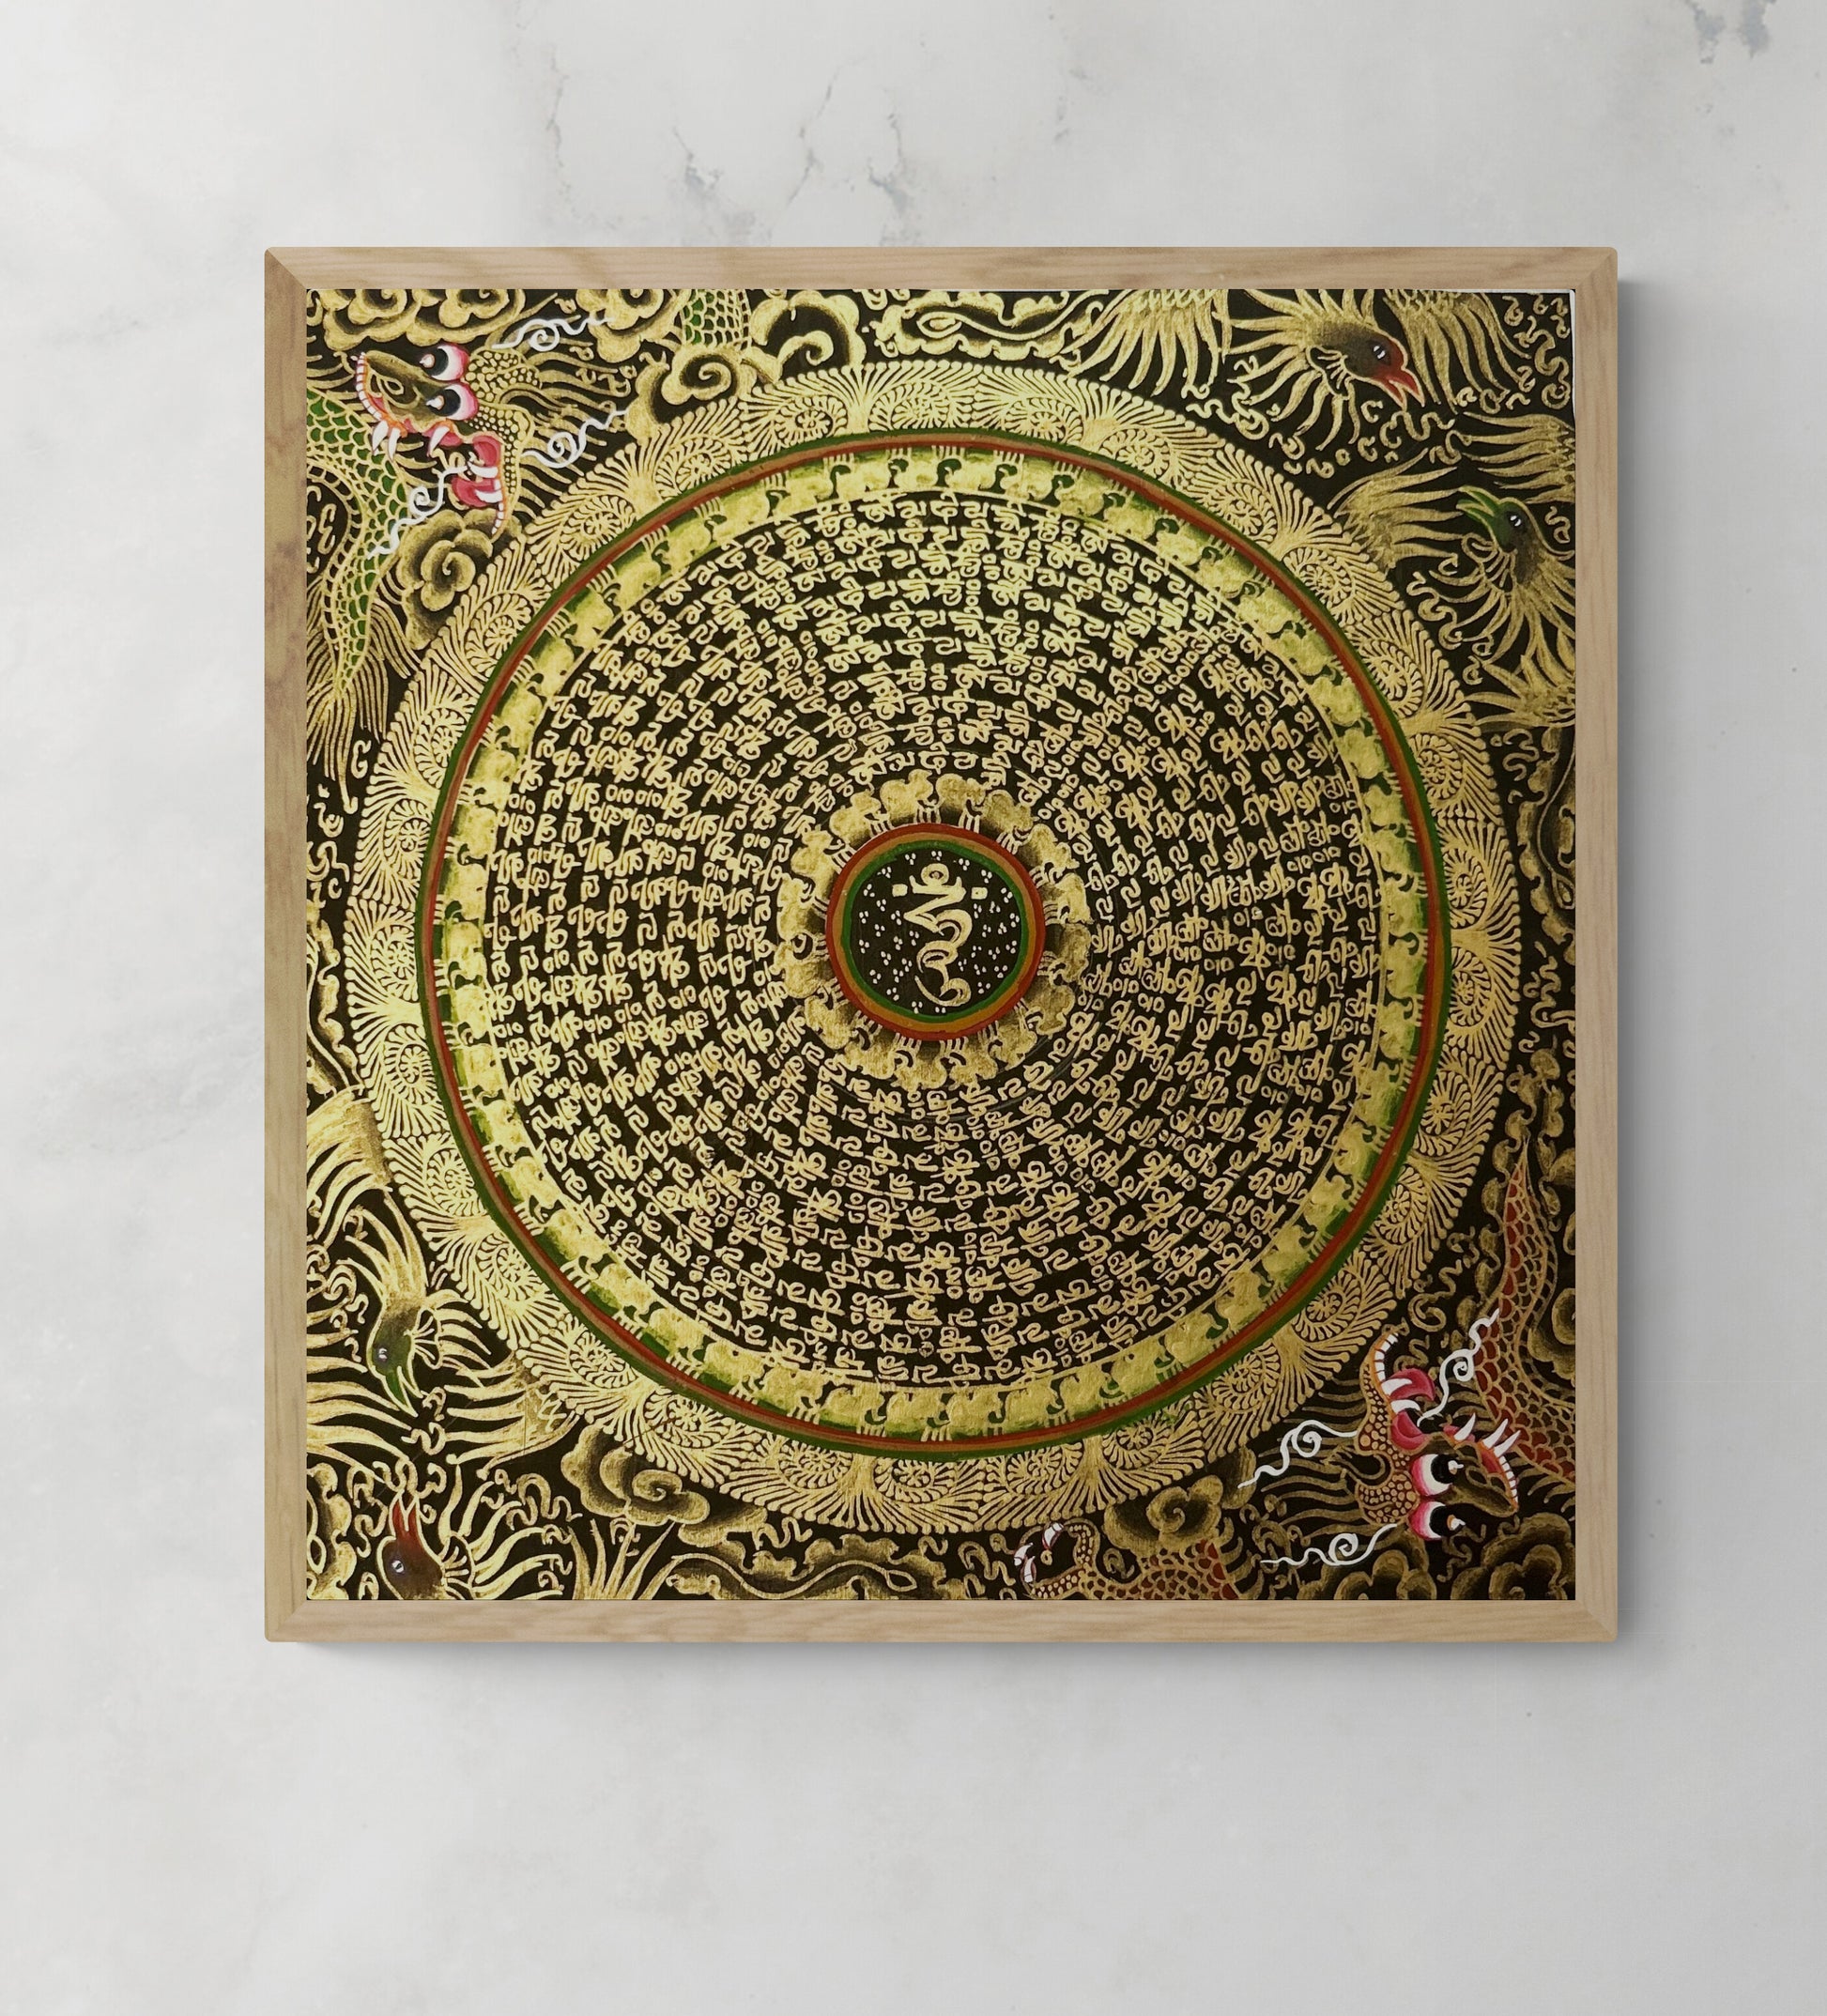 Gold Mantra Mandala Thangka with 'Om Mane Padme Hum' mantra, symbolizing compassion and knowledge, hand-painted in gold hues by Nepalese monks.